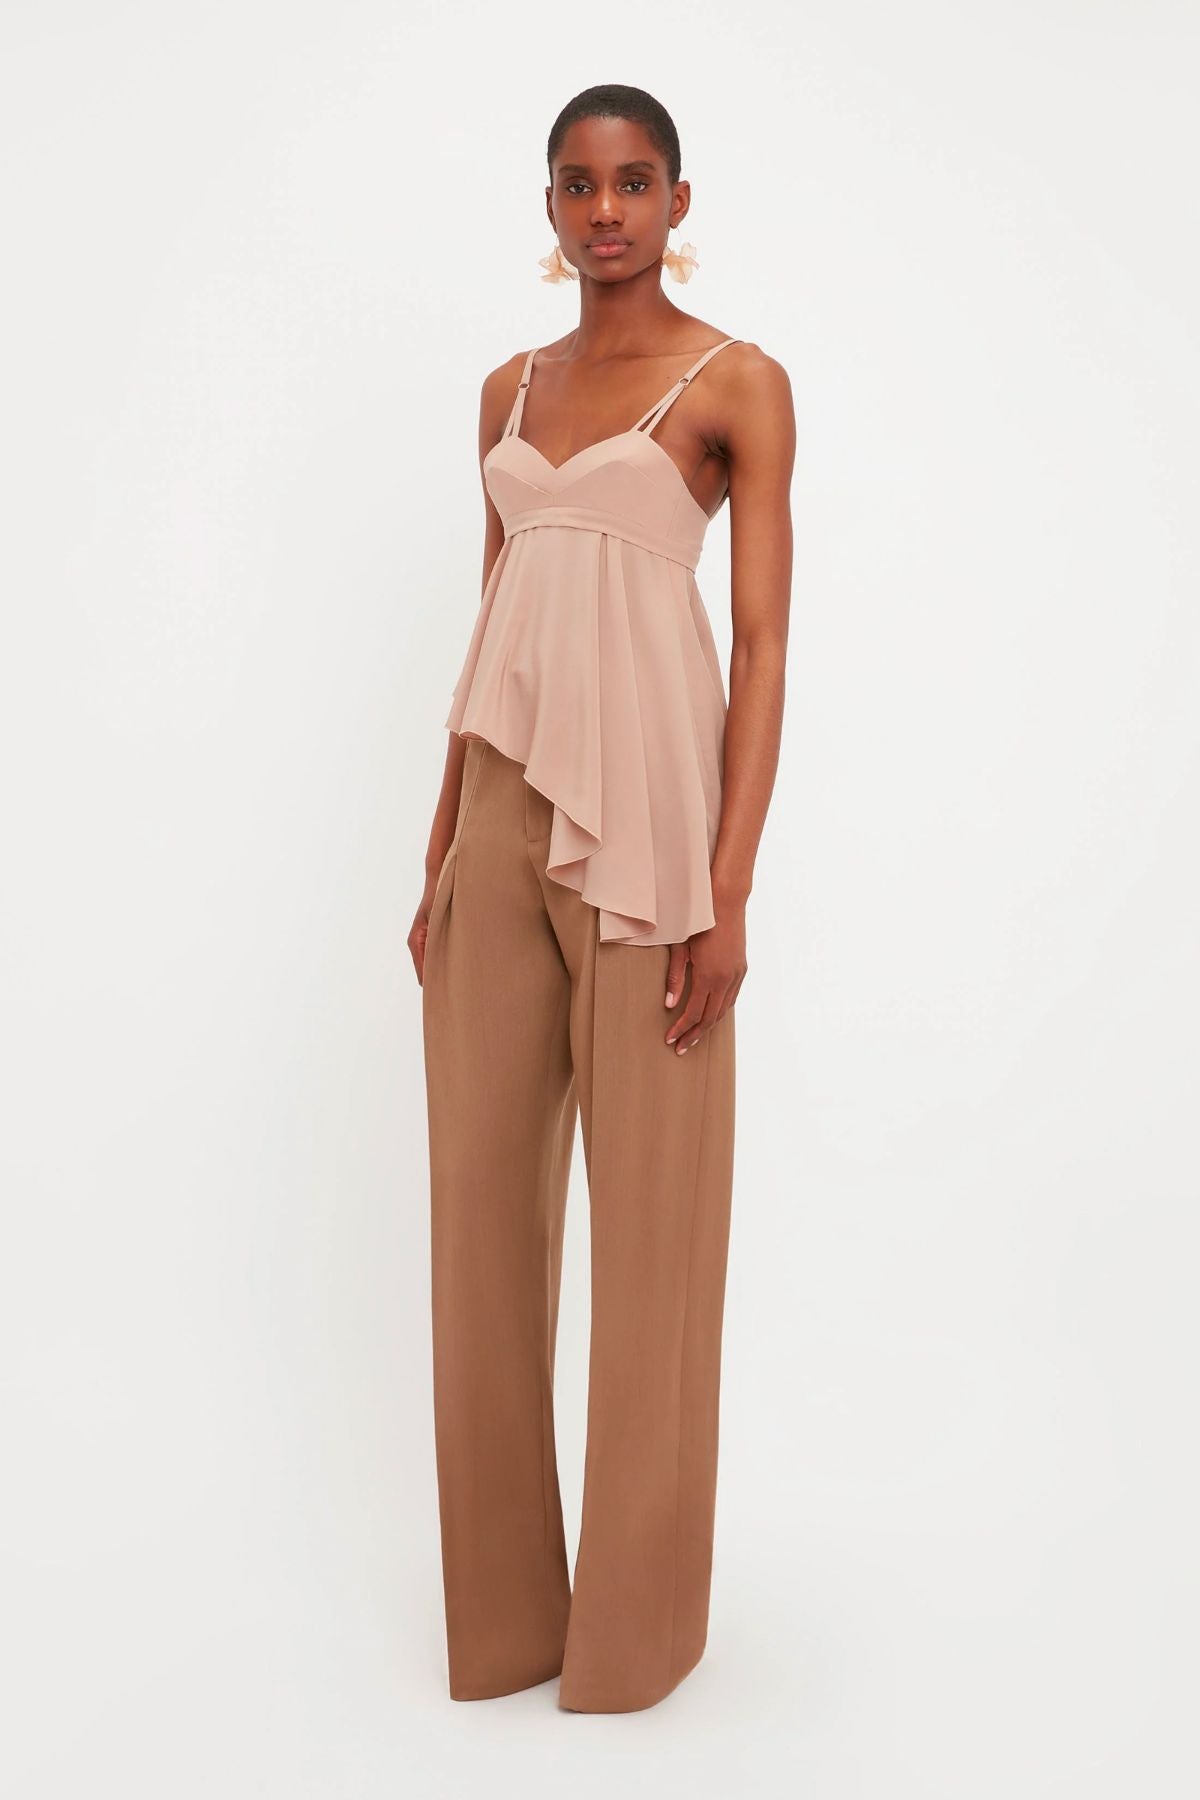 Victoria Beckham Front Pleat Trousers	- Fawn